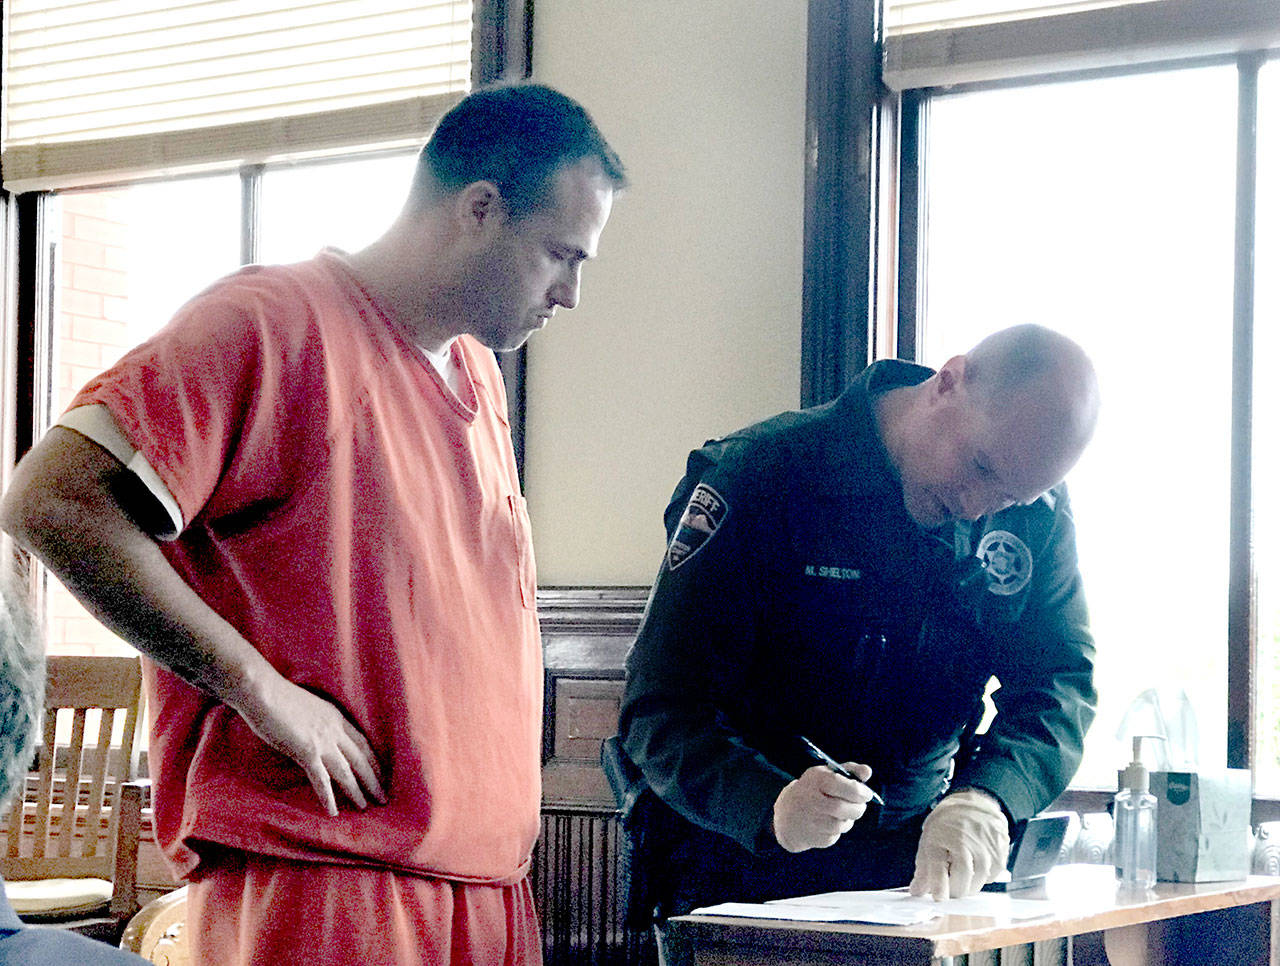 Charles Carroll Hartzell IV, left, has been sentenced to five years in prison after a plea deal on charges that related to a 2017 incident in which he led a Jefferson County Sheriff’s deputy on a chase from Chimacum to Port Hadlock. The case had been returned from the Court of Appeals. (Brian McLean/Peninsula Daily News)